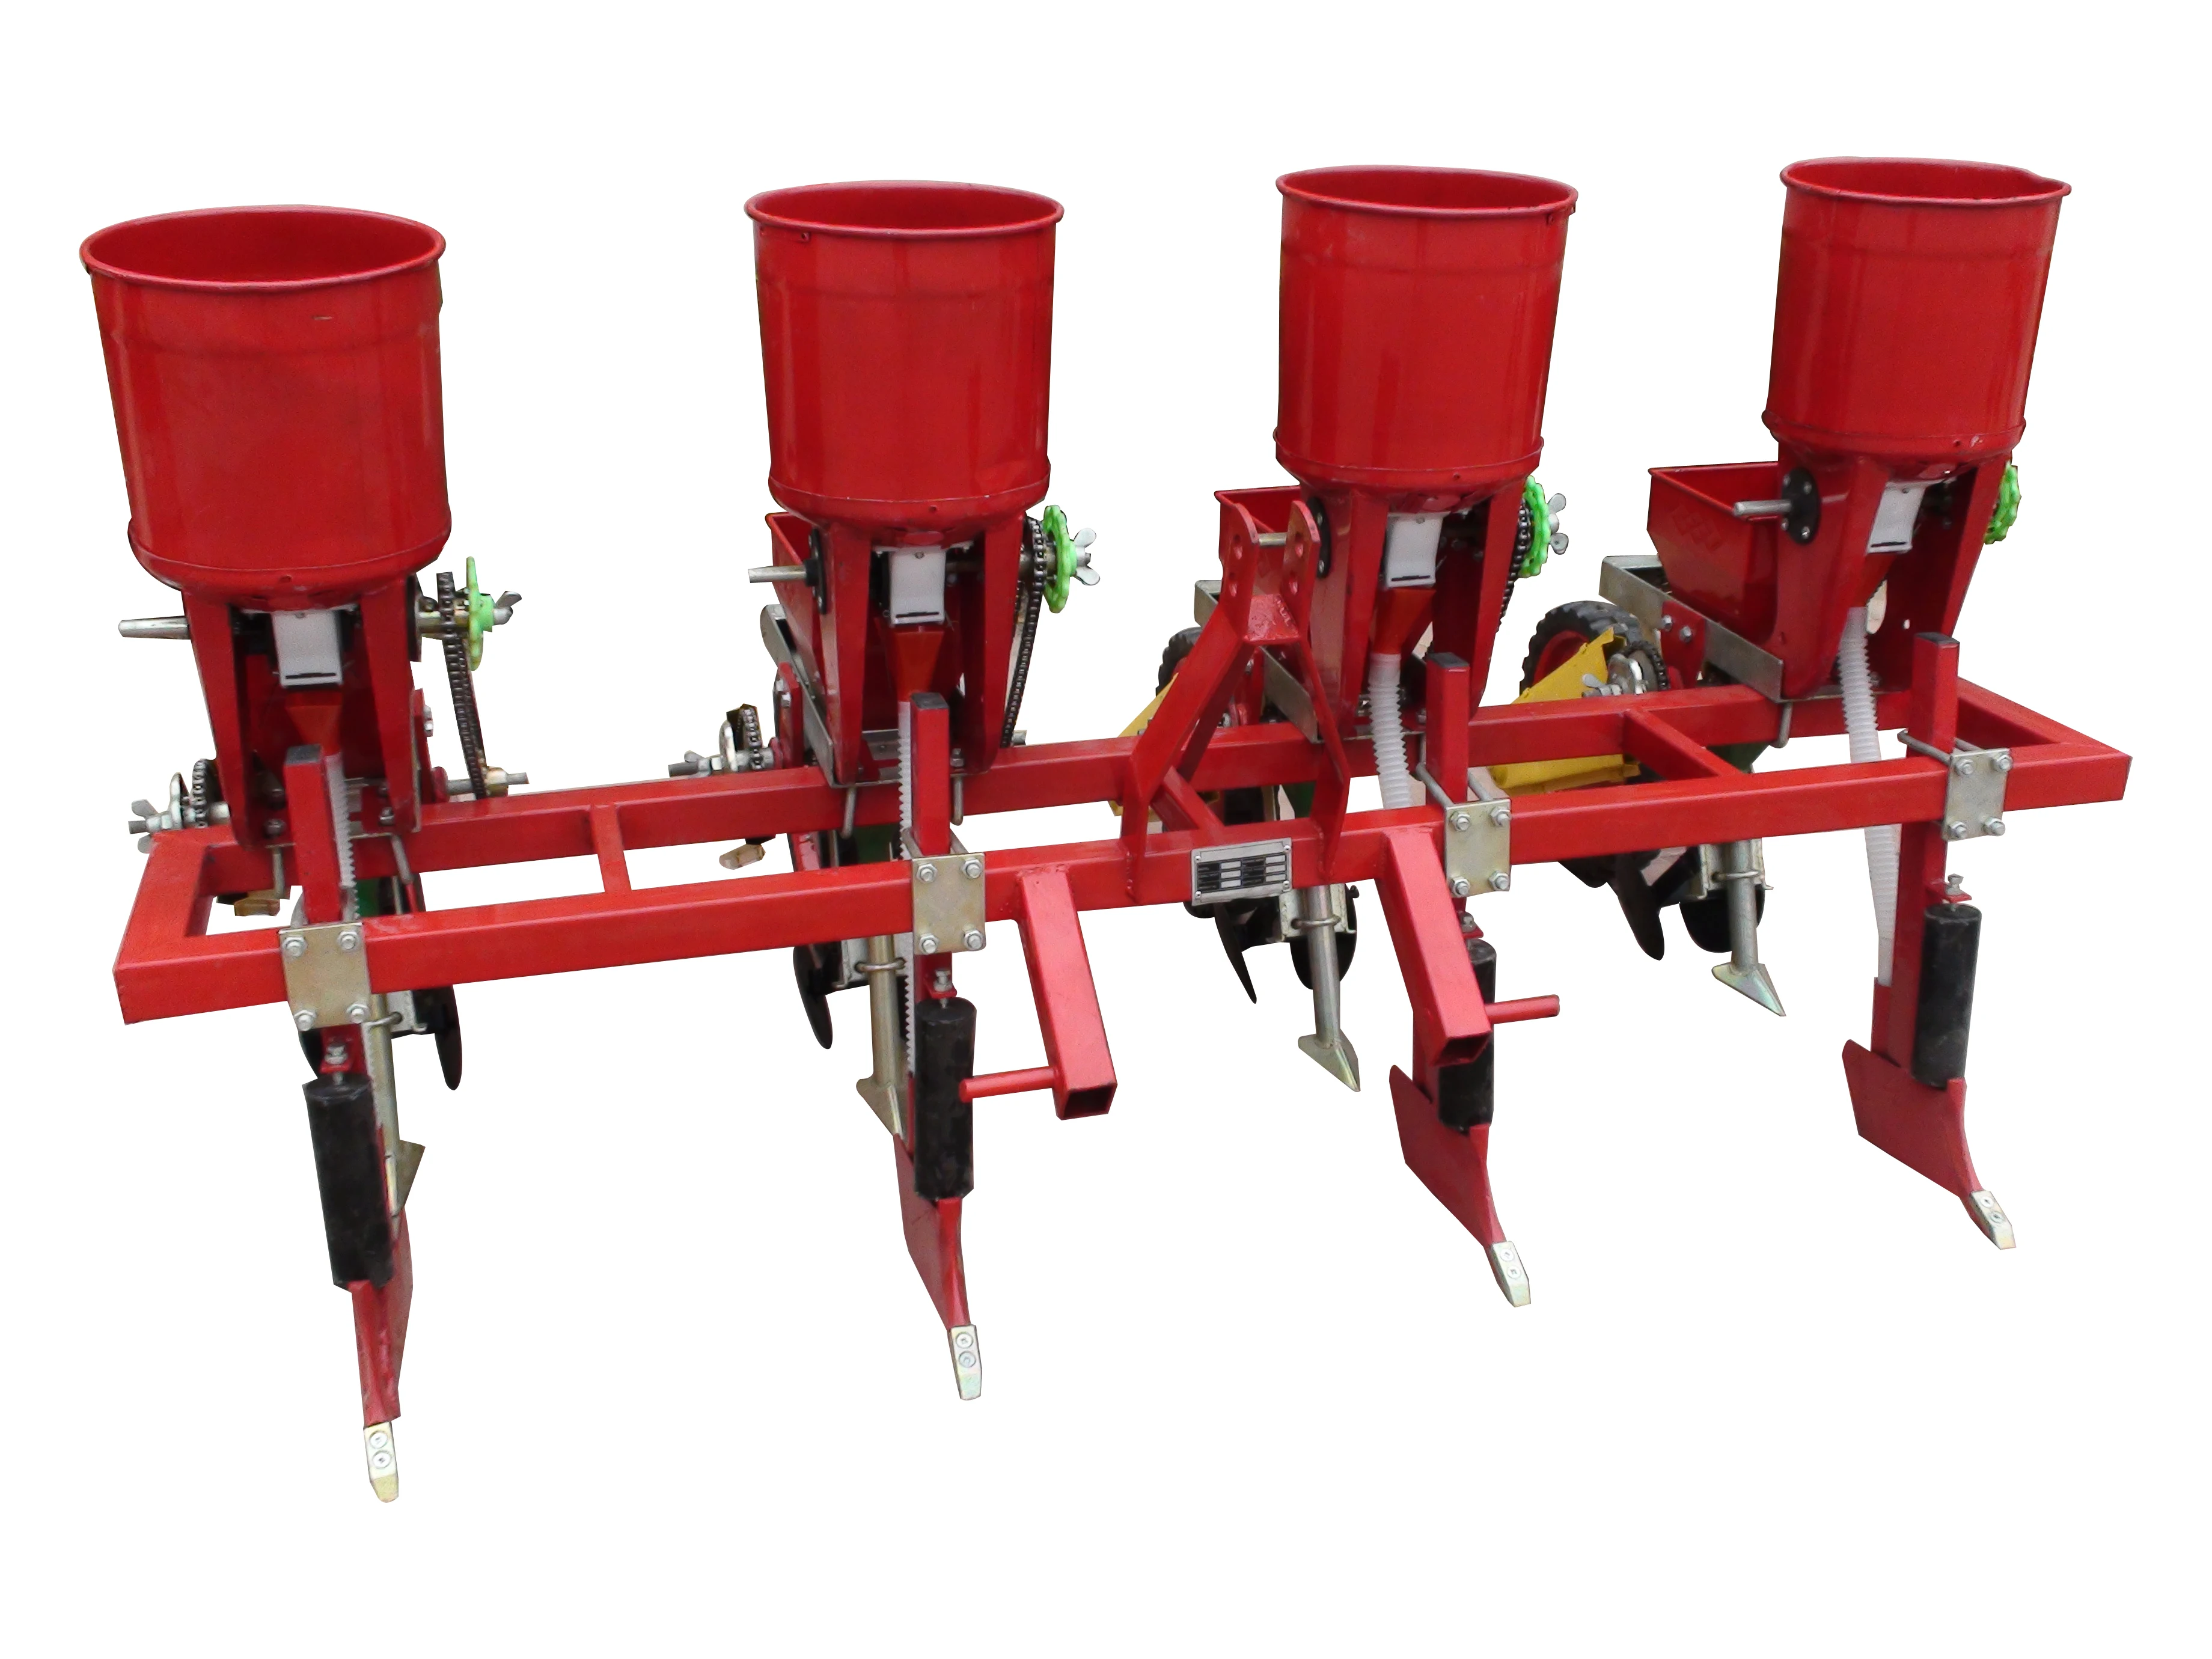 This kind of precision corn seeder/corn drill is used for planing corn, soy...